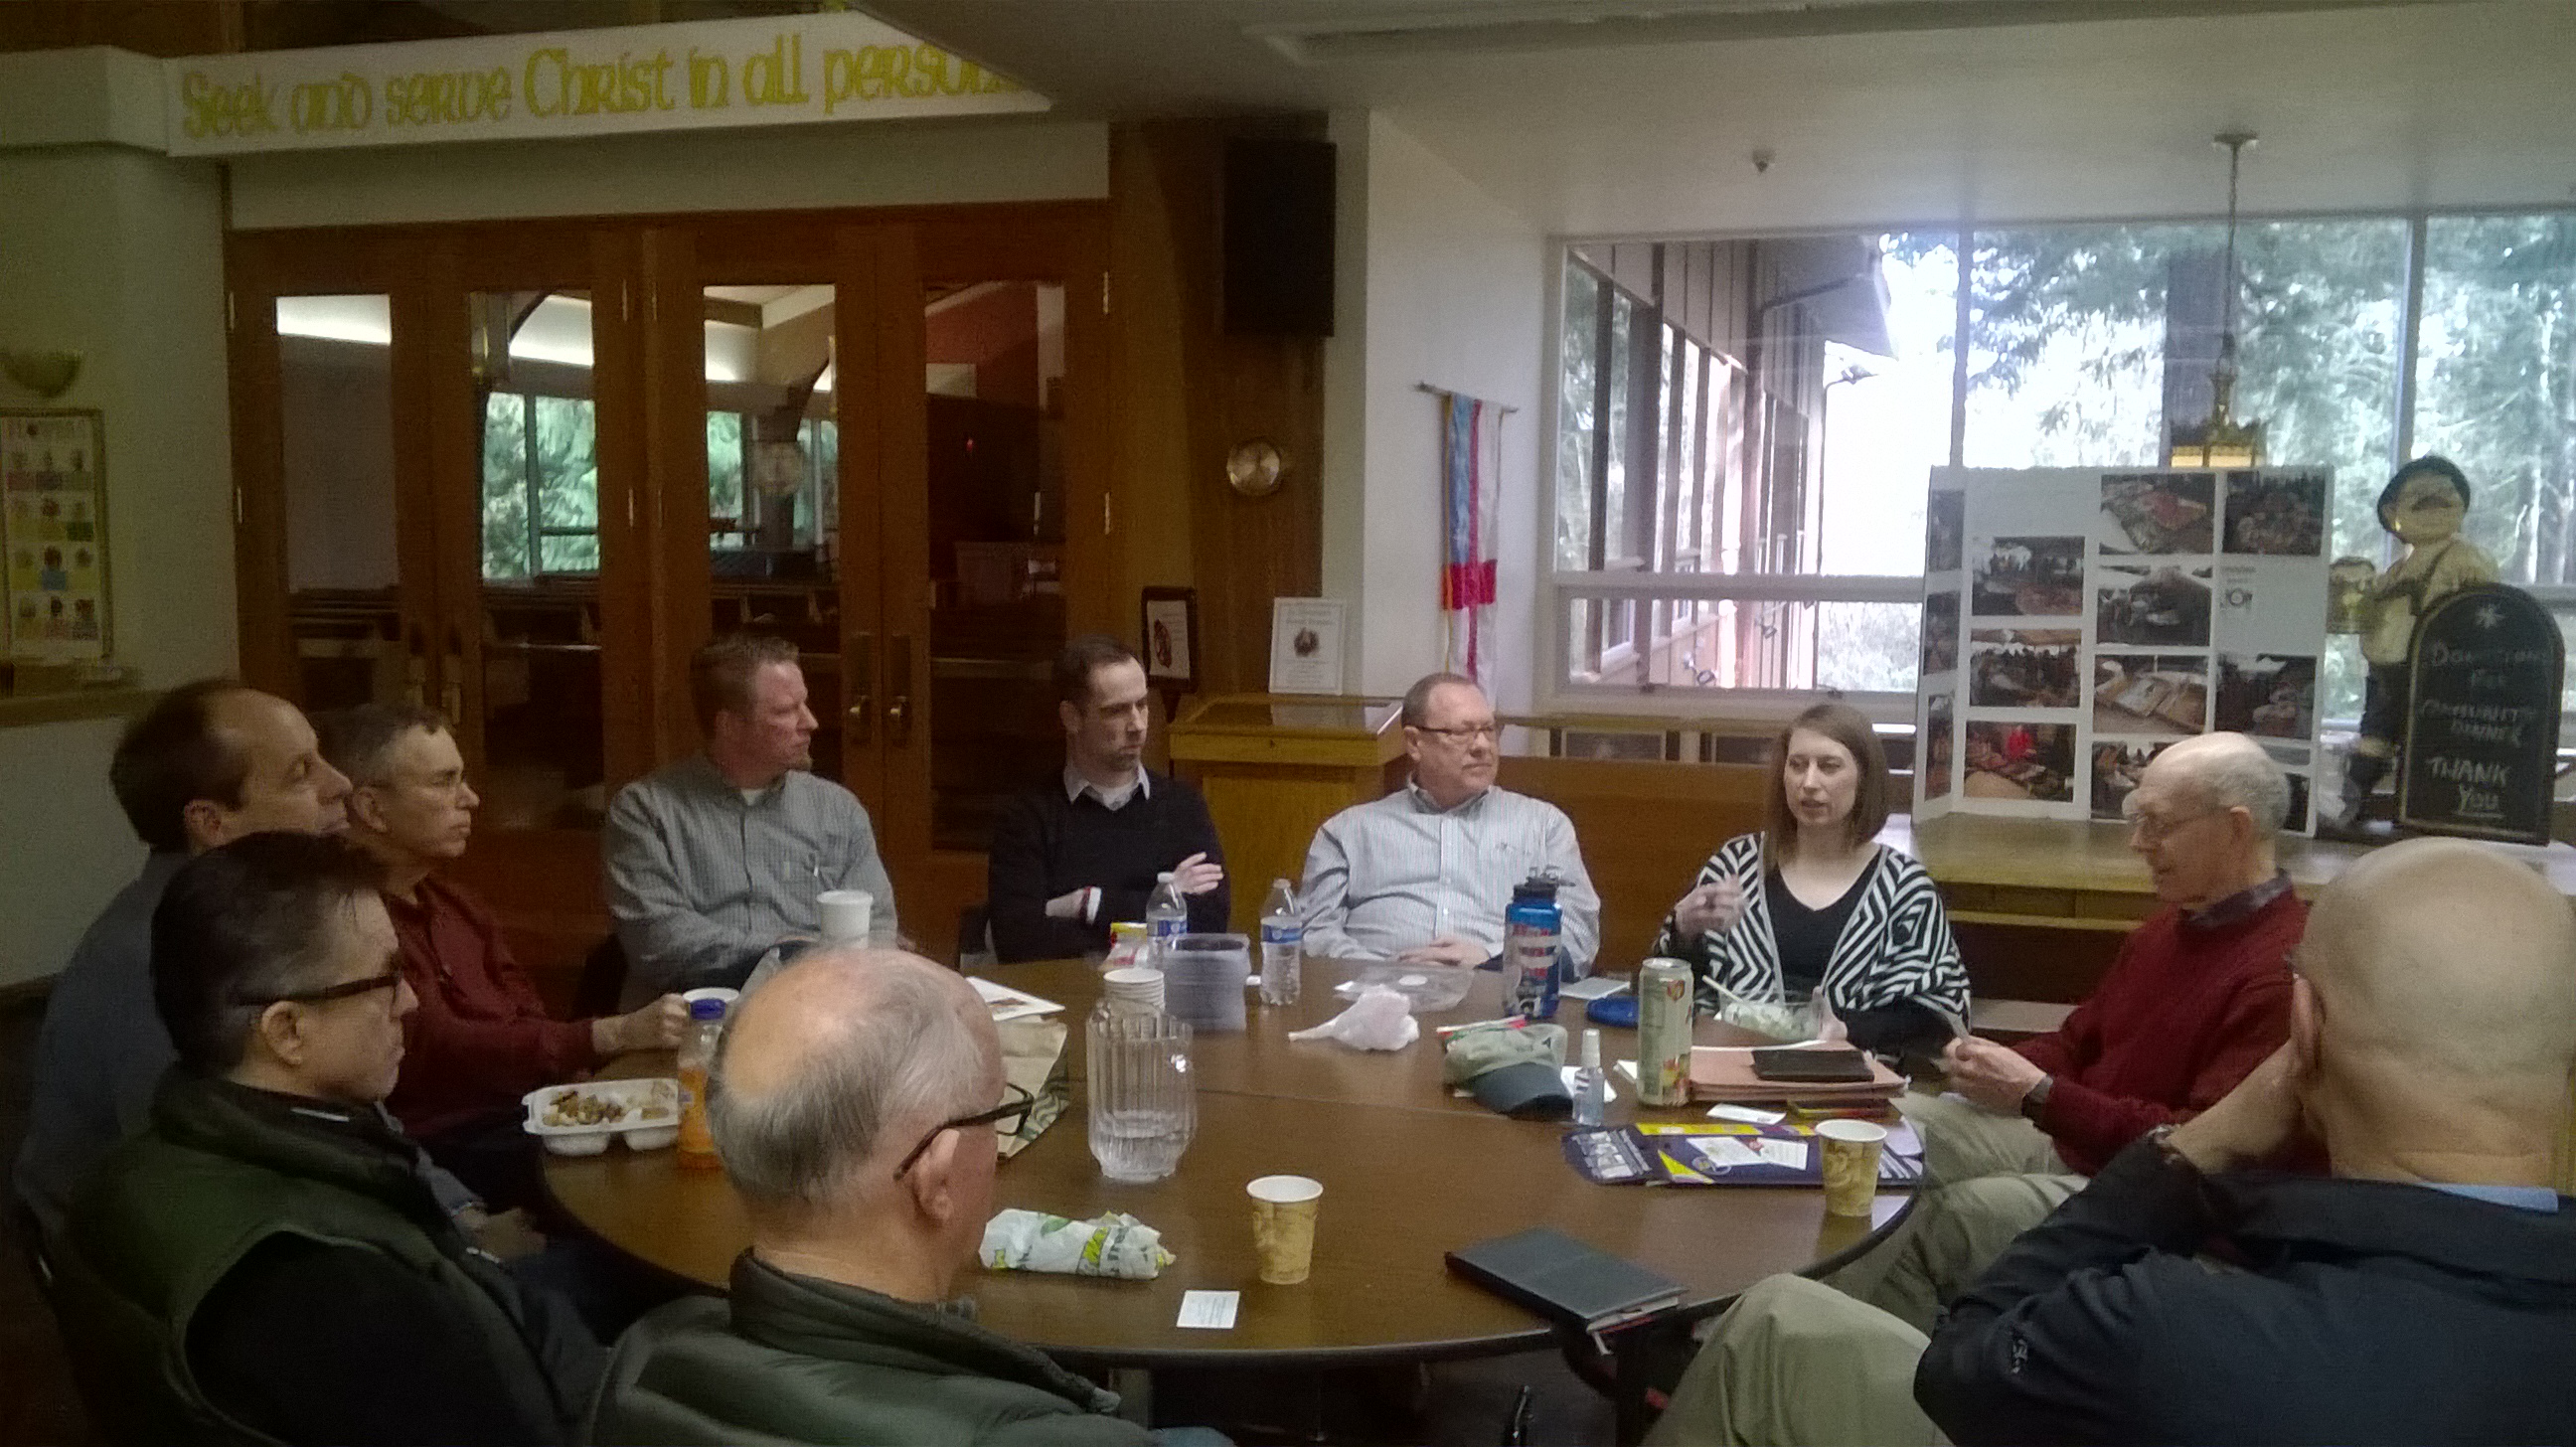 Church leaders lunch at St Dunstan March 10th 2016